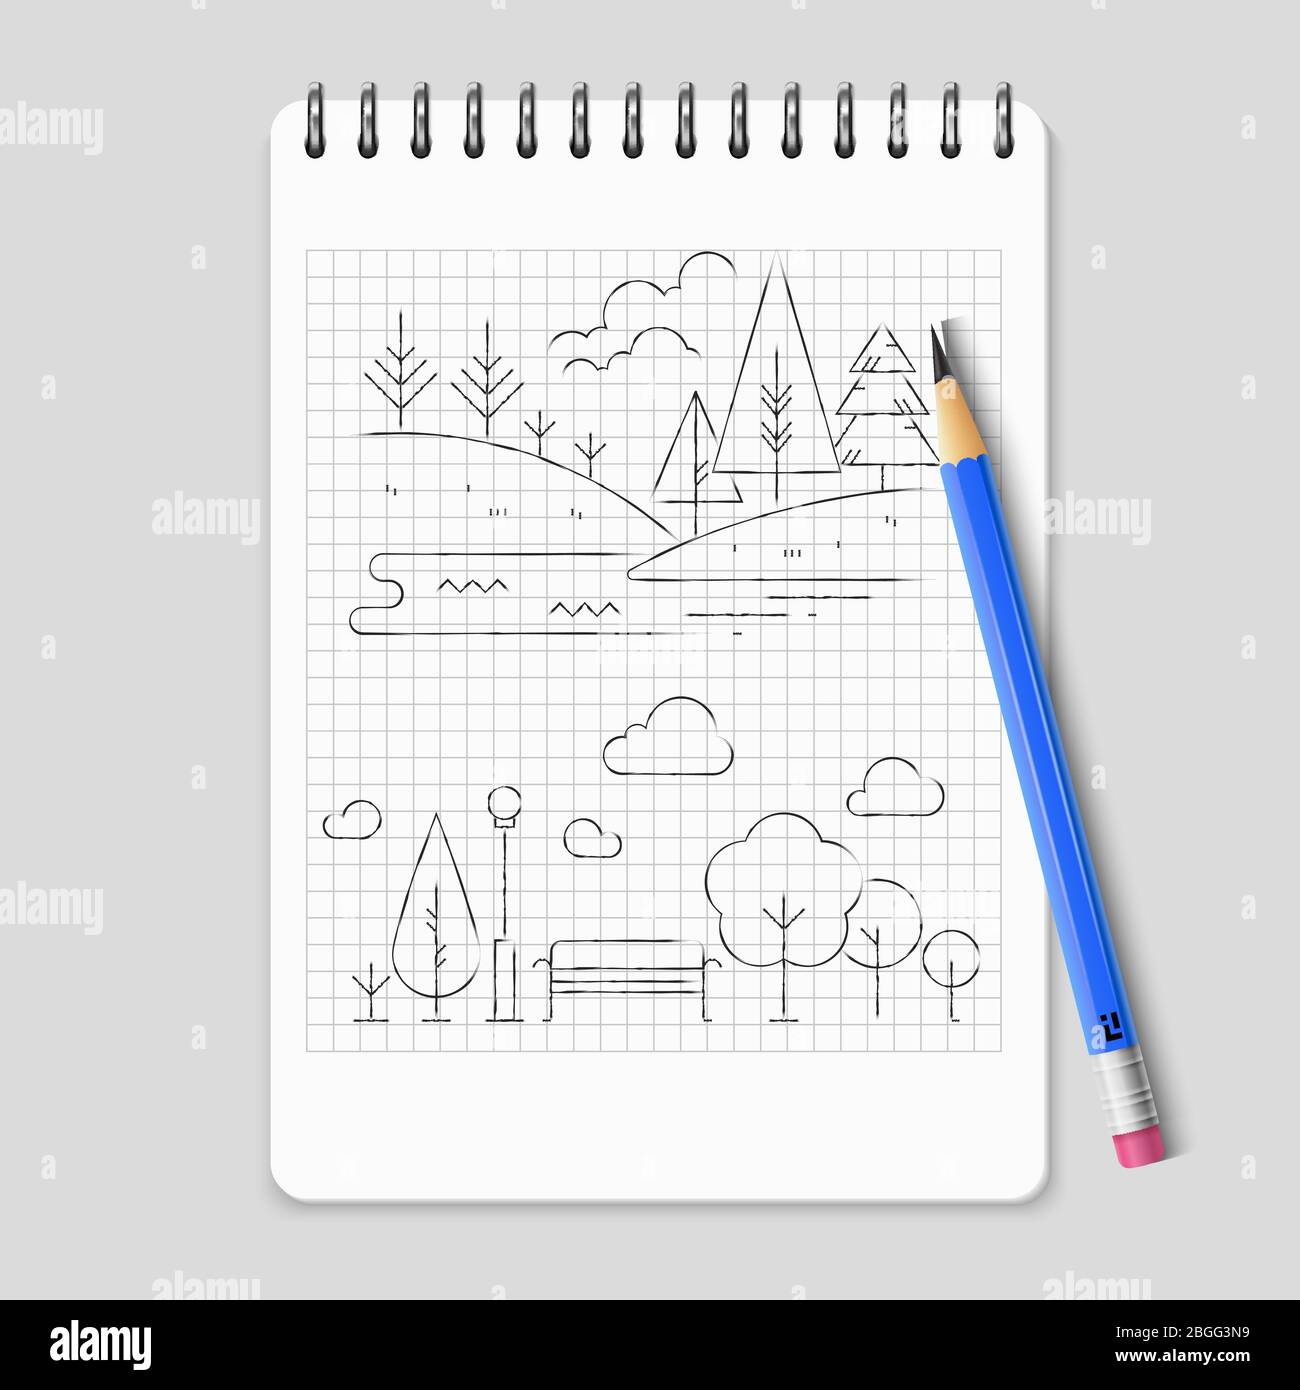 outline drawings of landscapes